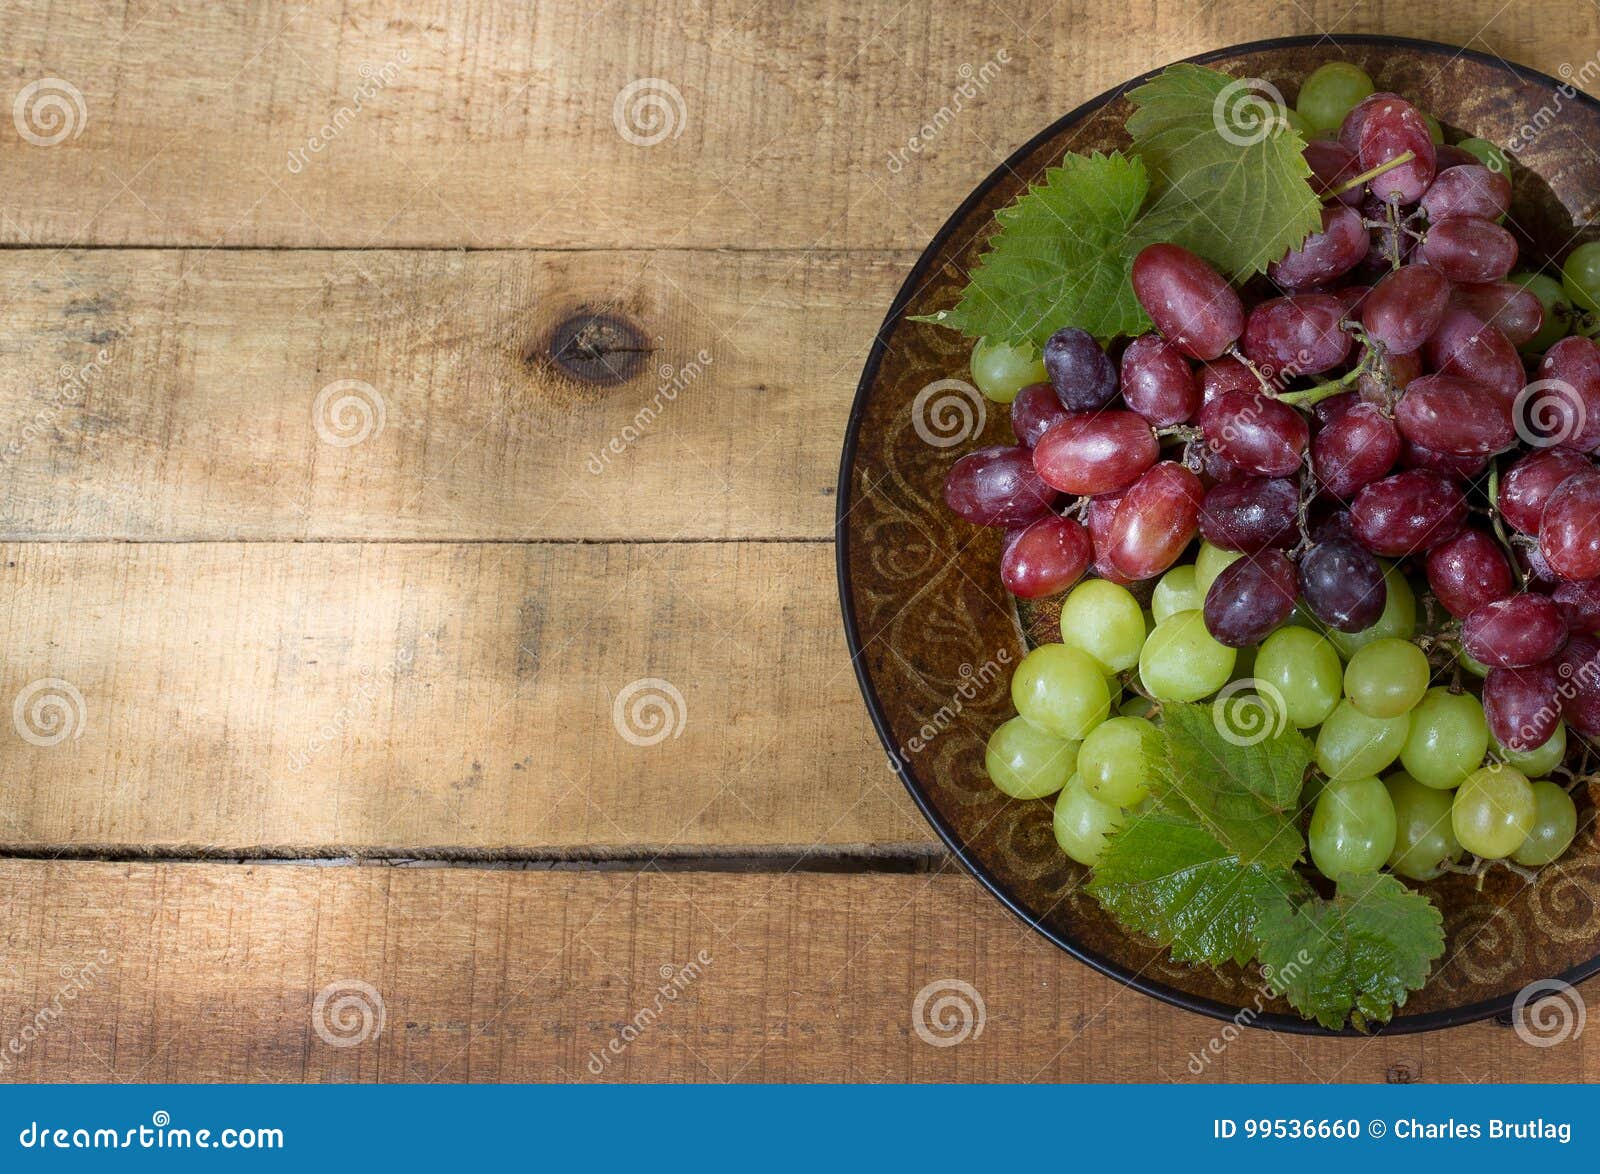 Plate of Red and White Grapes Stock Photo - Image of natural, table ...